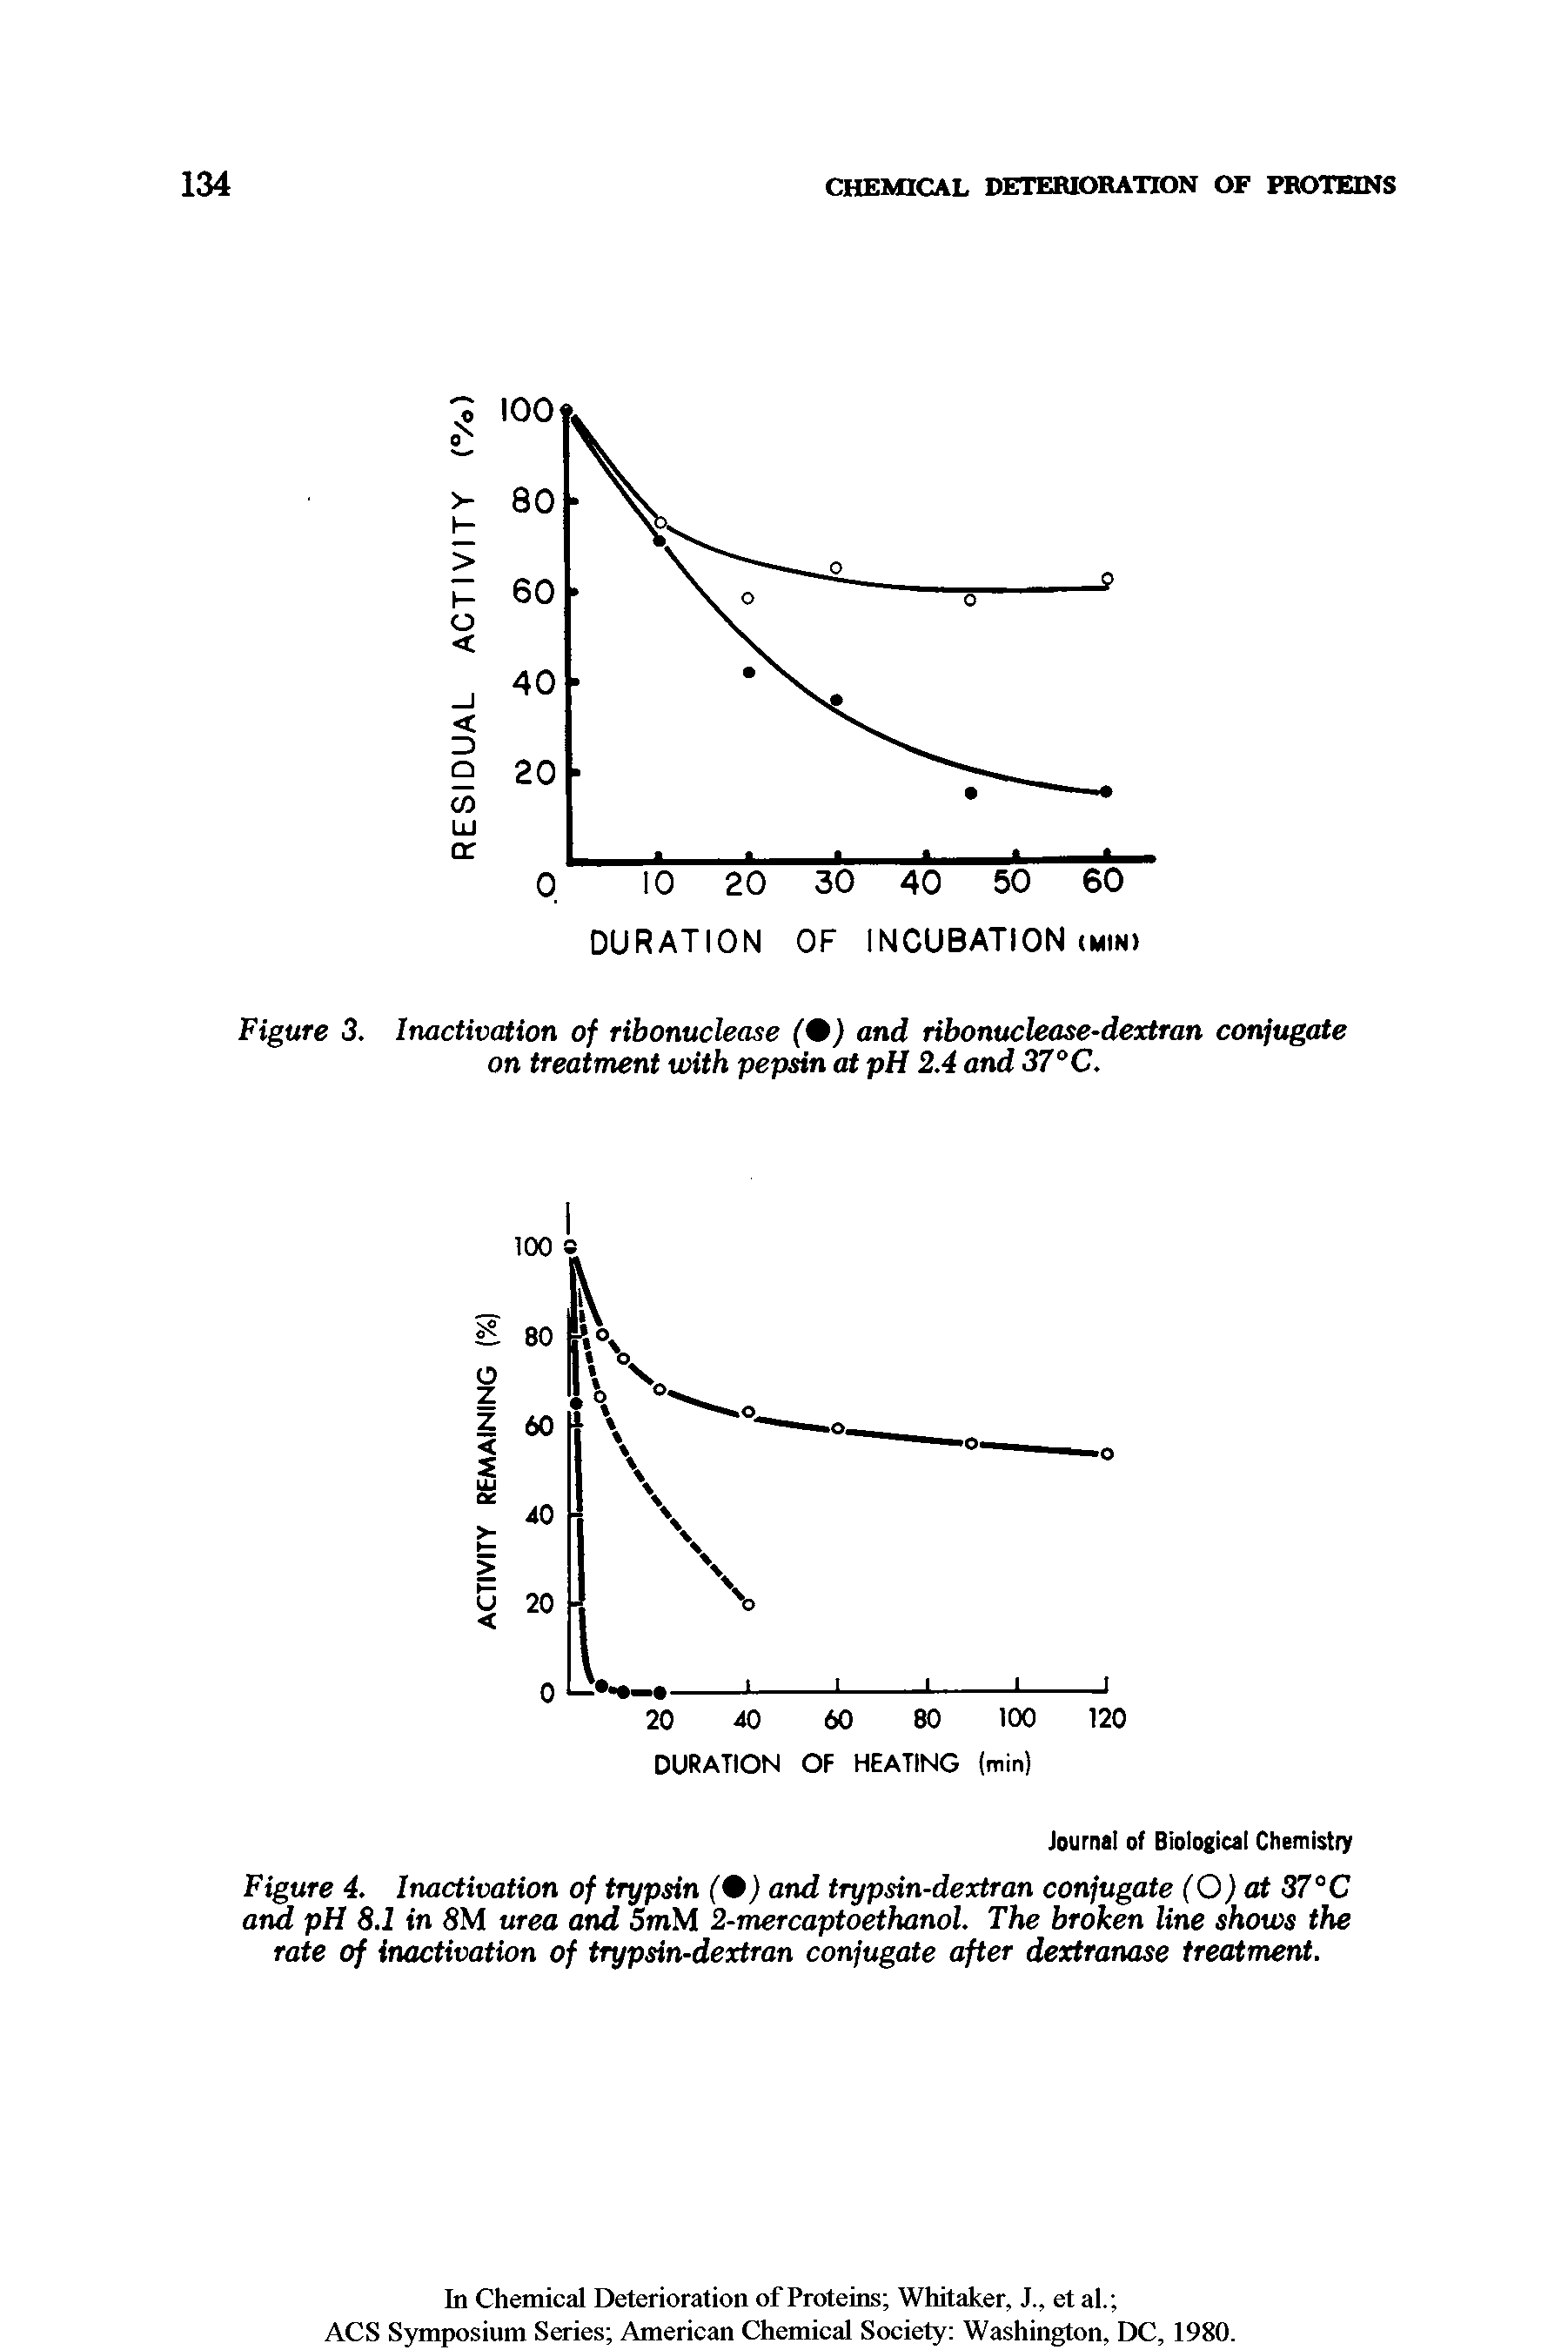 Figure 4. Inactivation of trypsin (0) and trypsin-dextran conjugate (O) at 37°C and pH 8.1 in 8M urea and 5mM 2-mercaptoethanol. The broken line shows the rate of inactivation of trypsin-dextran conjugate after dextranase treatment.